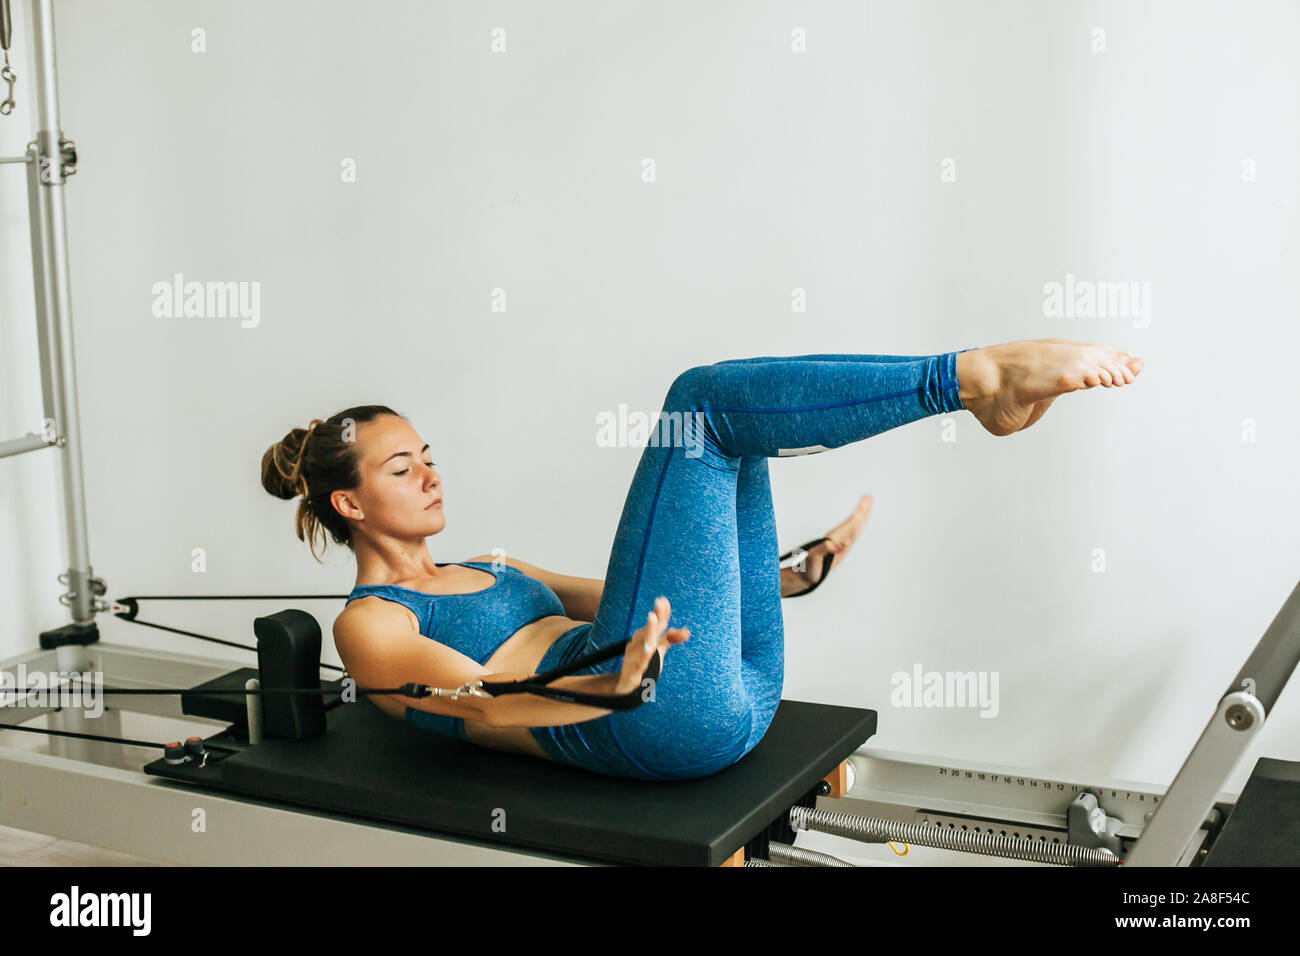 Woman performing Pilates exercise using a Cadillac or Trapeze table Stock Photo